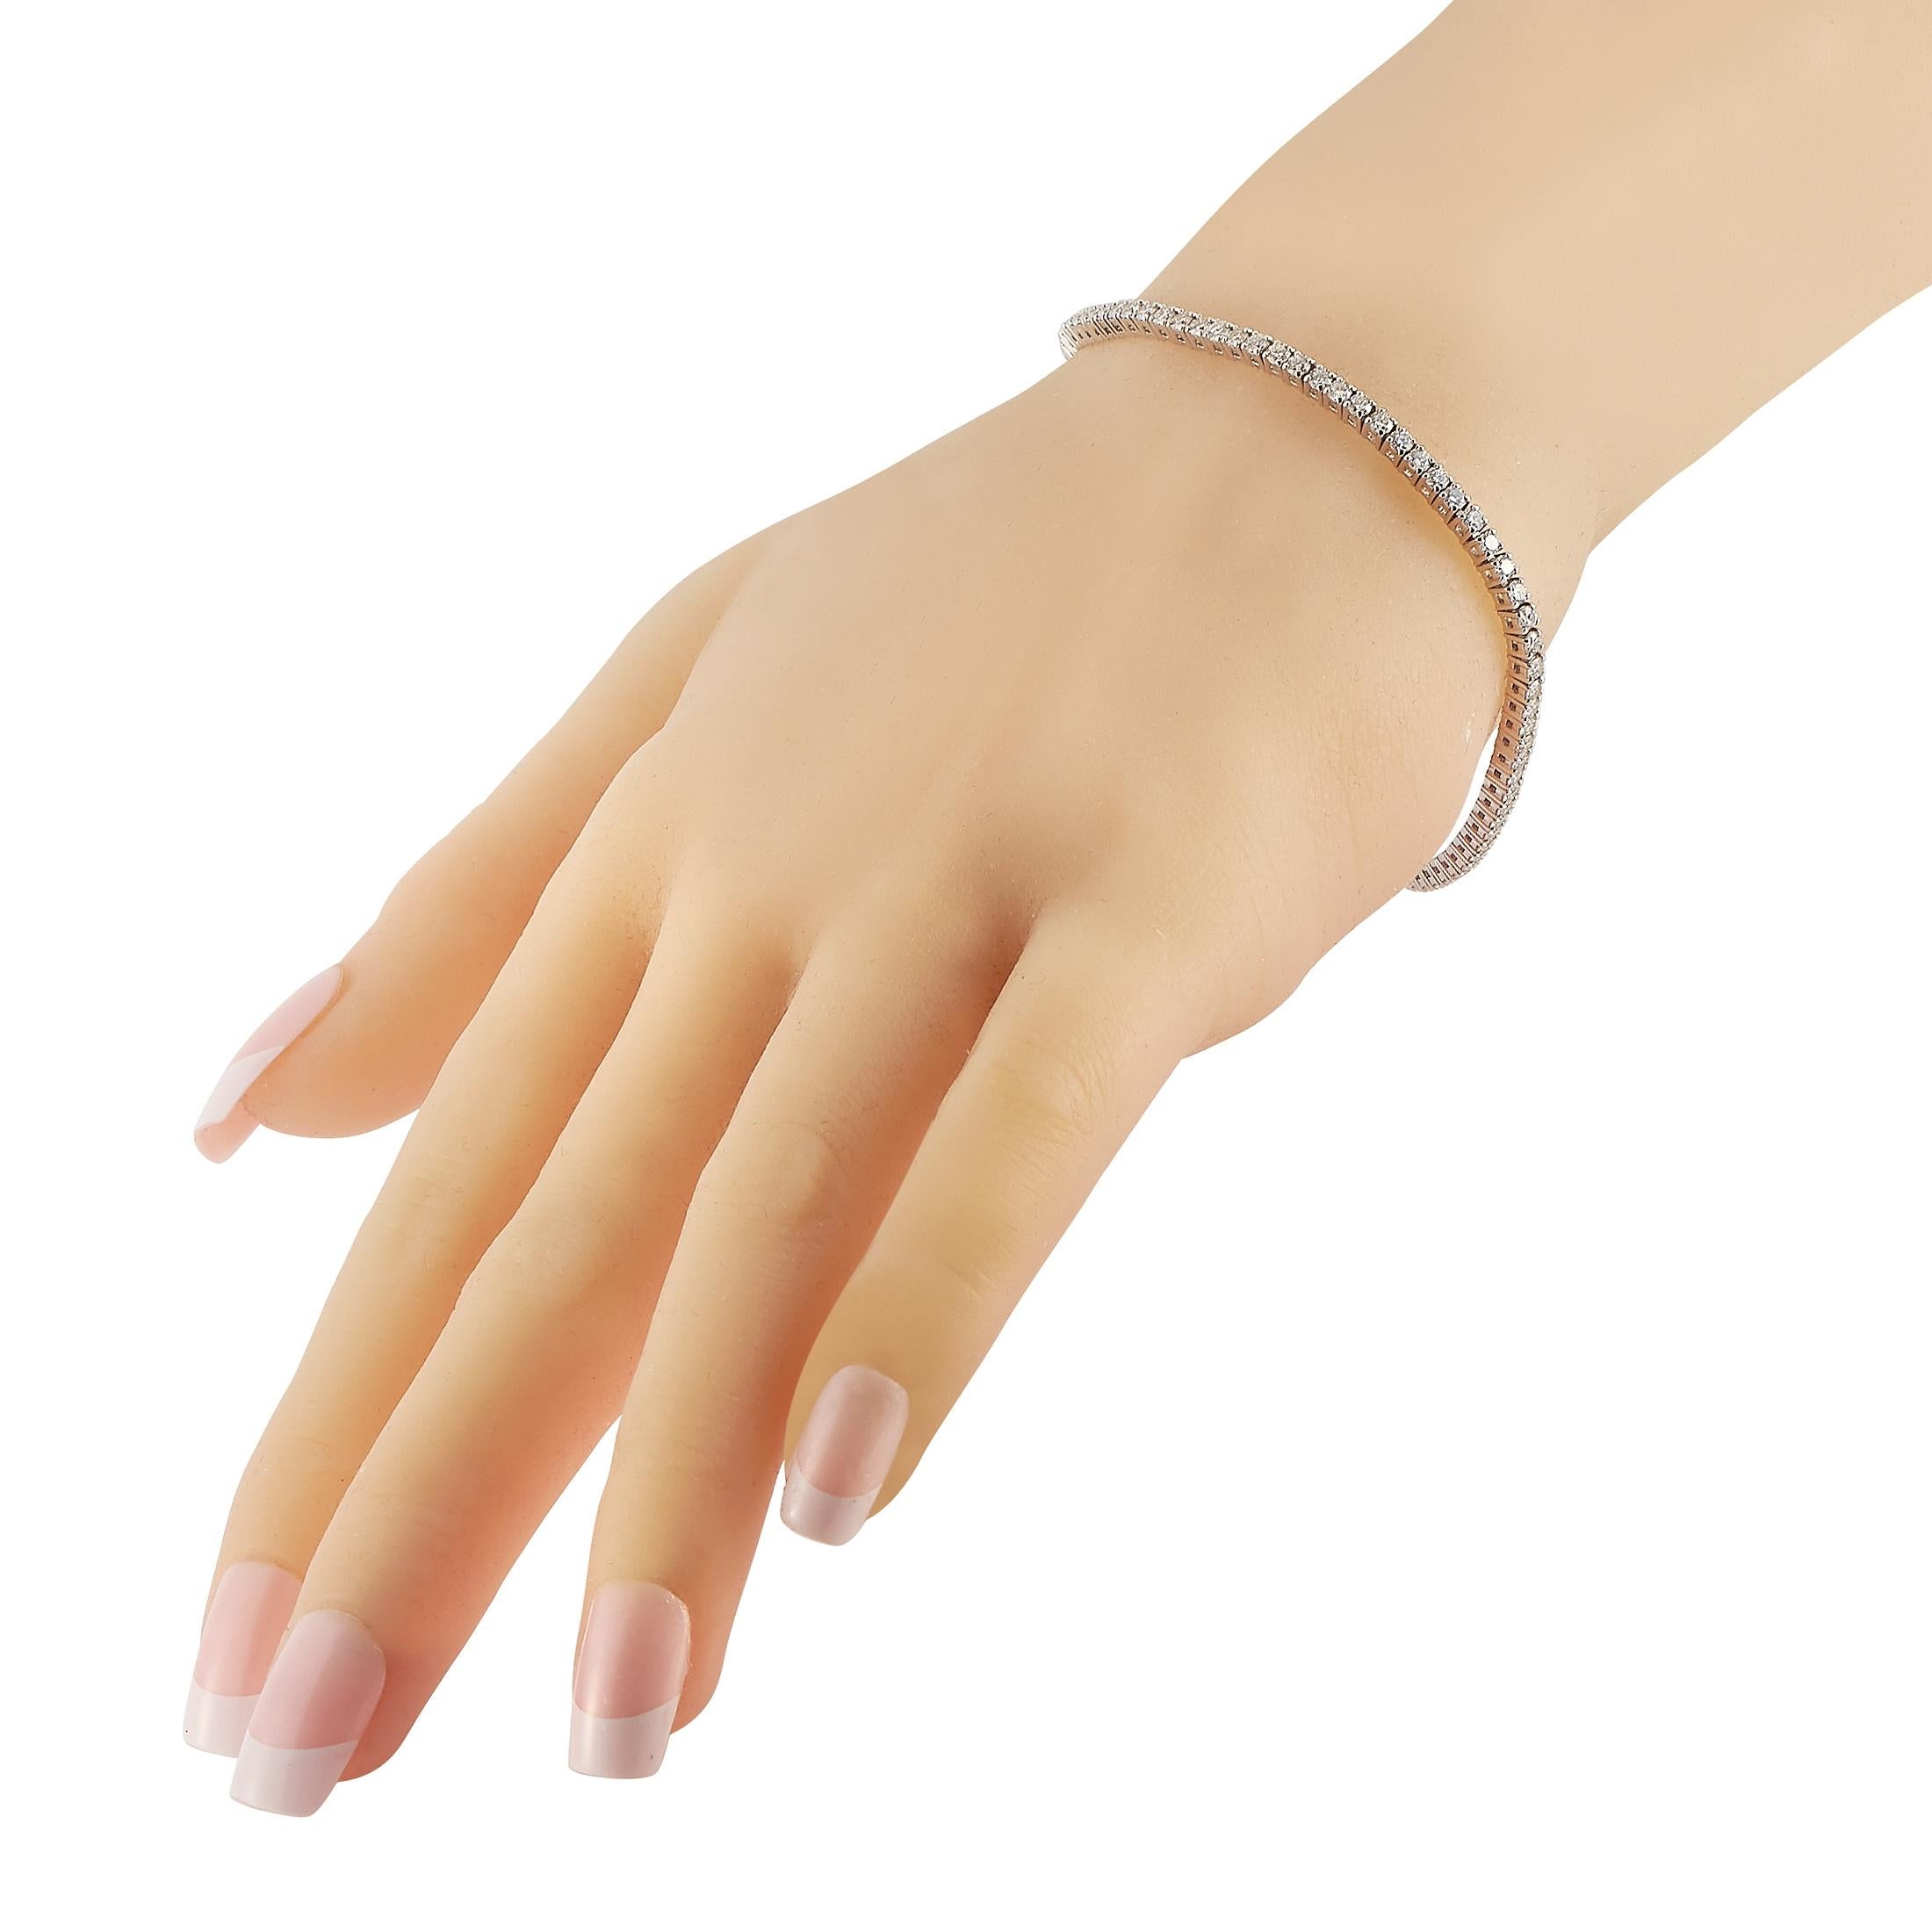 Add a touch of luxury to any outfit with this stylish, understated tennis bracelet. This piece’s sleek 14K White Gold setting measures 7.25” long and is adorned with round-cut diamonds totaling 3.14 carats. 
 
 This jewelry piece is offered in